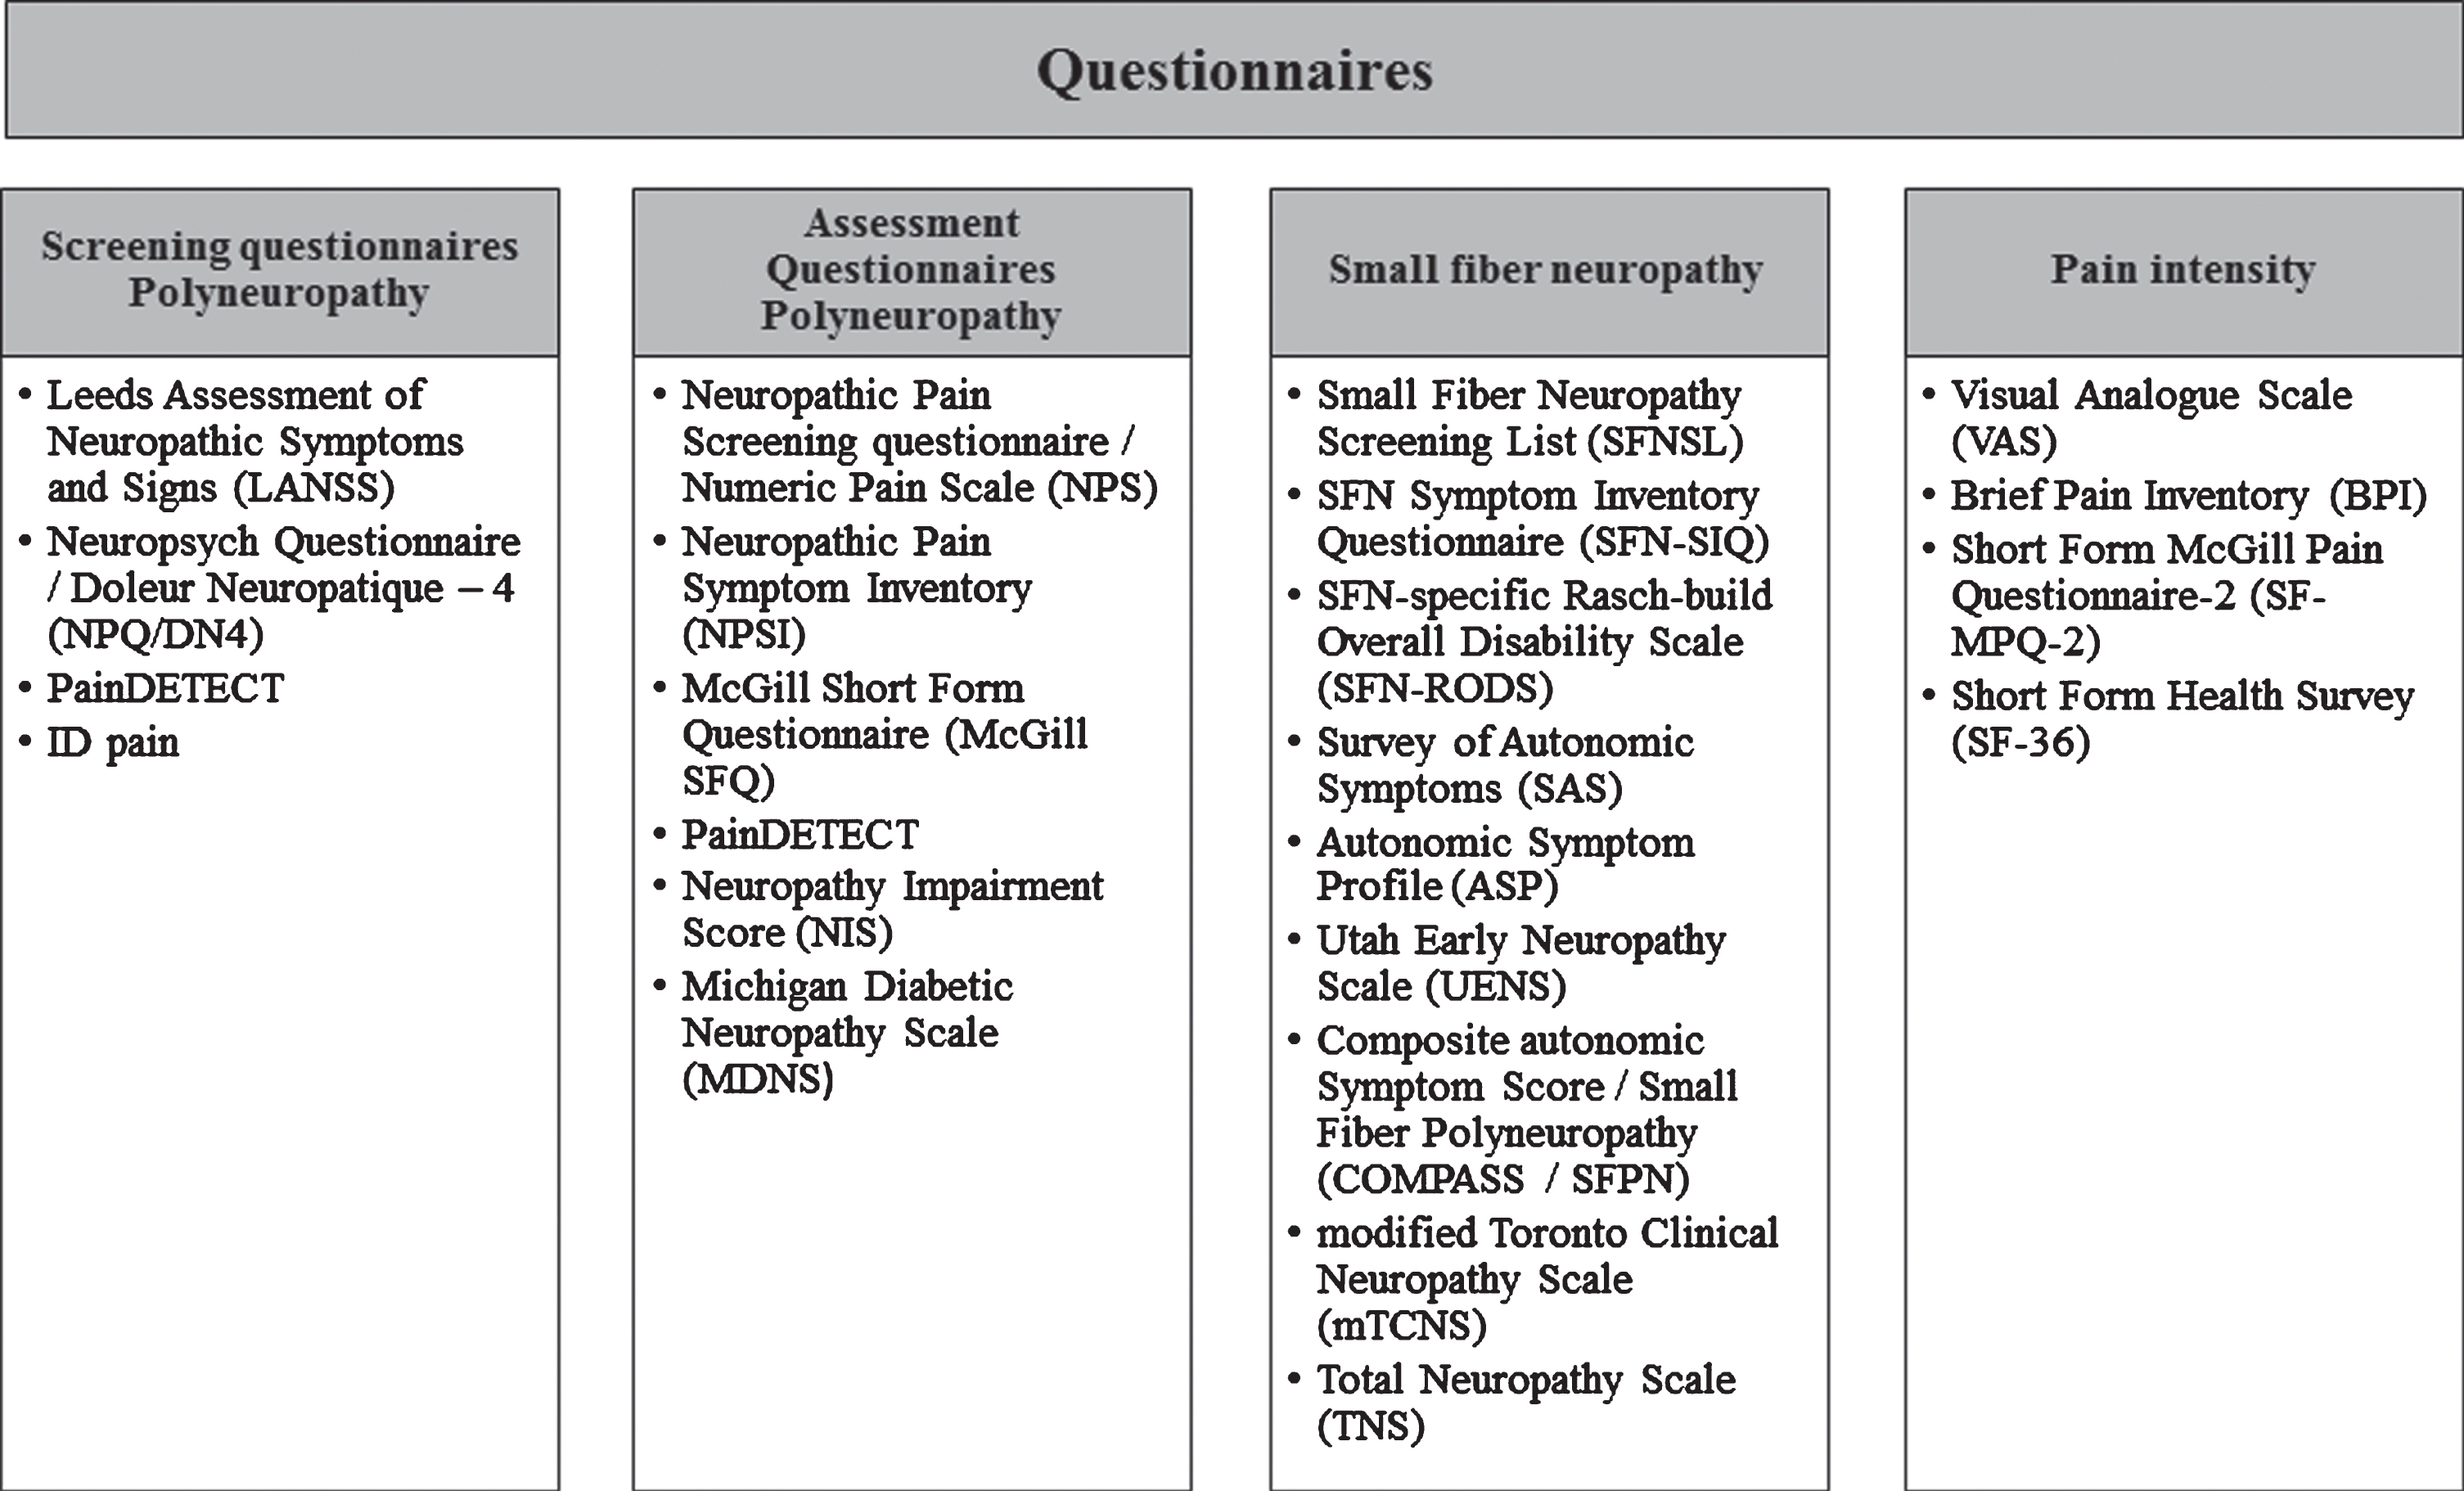 Overview of neuropathy questionnaires, divided into screening questionnaires, assessment questionnaires, specific small fiber questionnaires and pain intensity questionnaires.